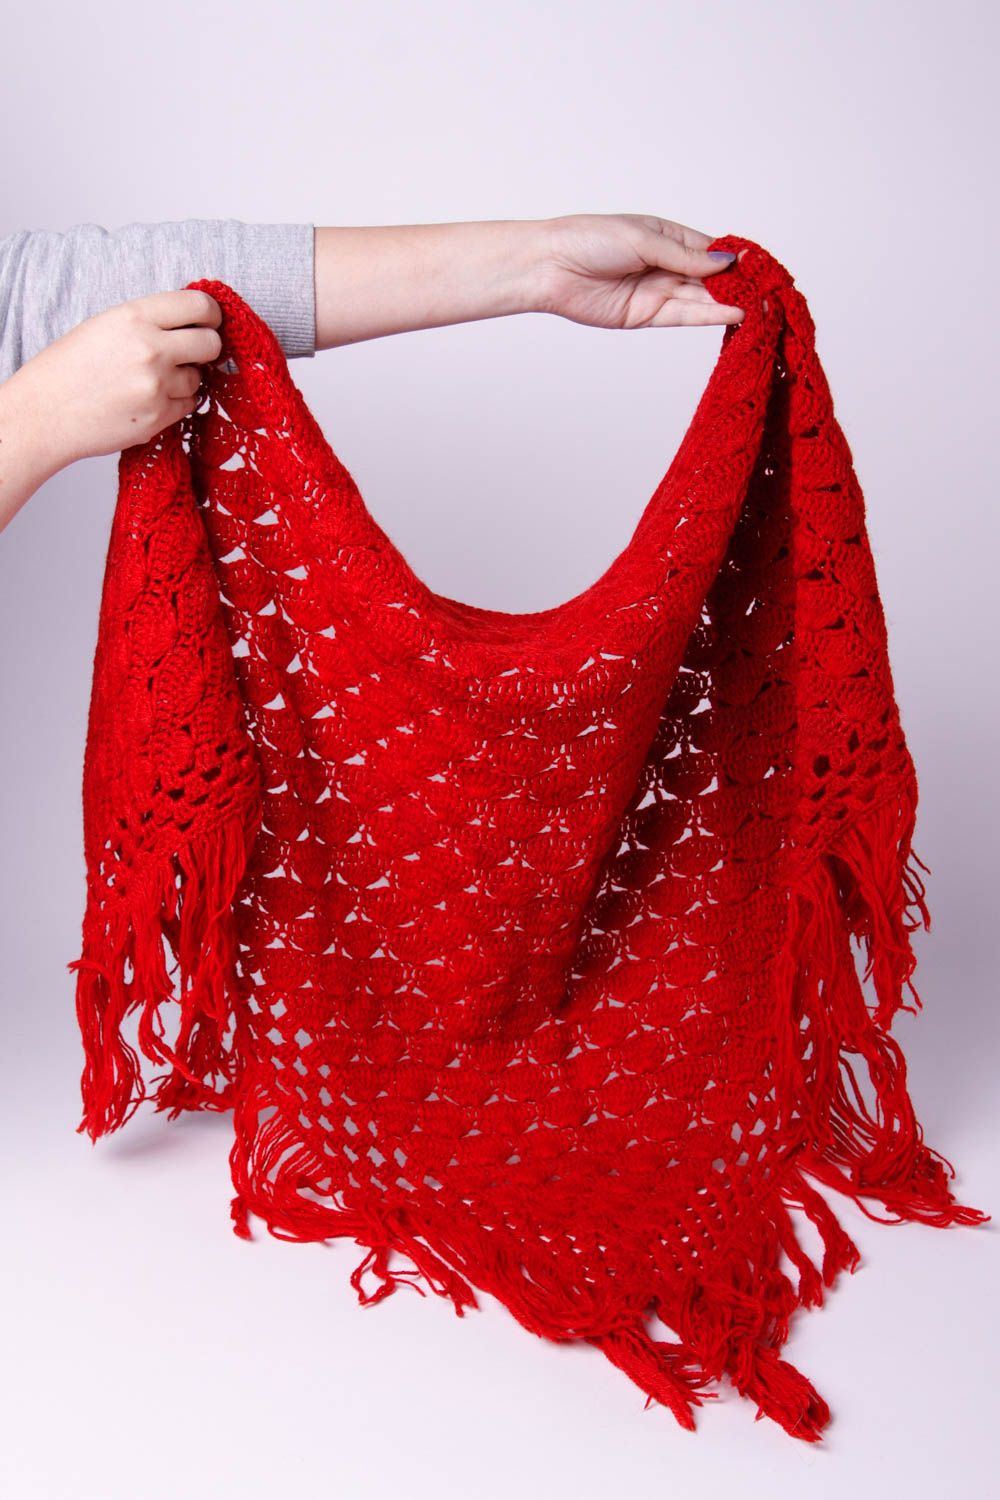 Handmade winter shawl hand-knitted scarf for women stylish shawl winter clothes photo 3